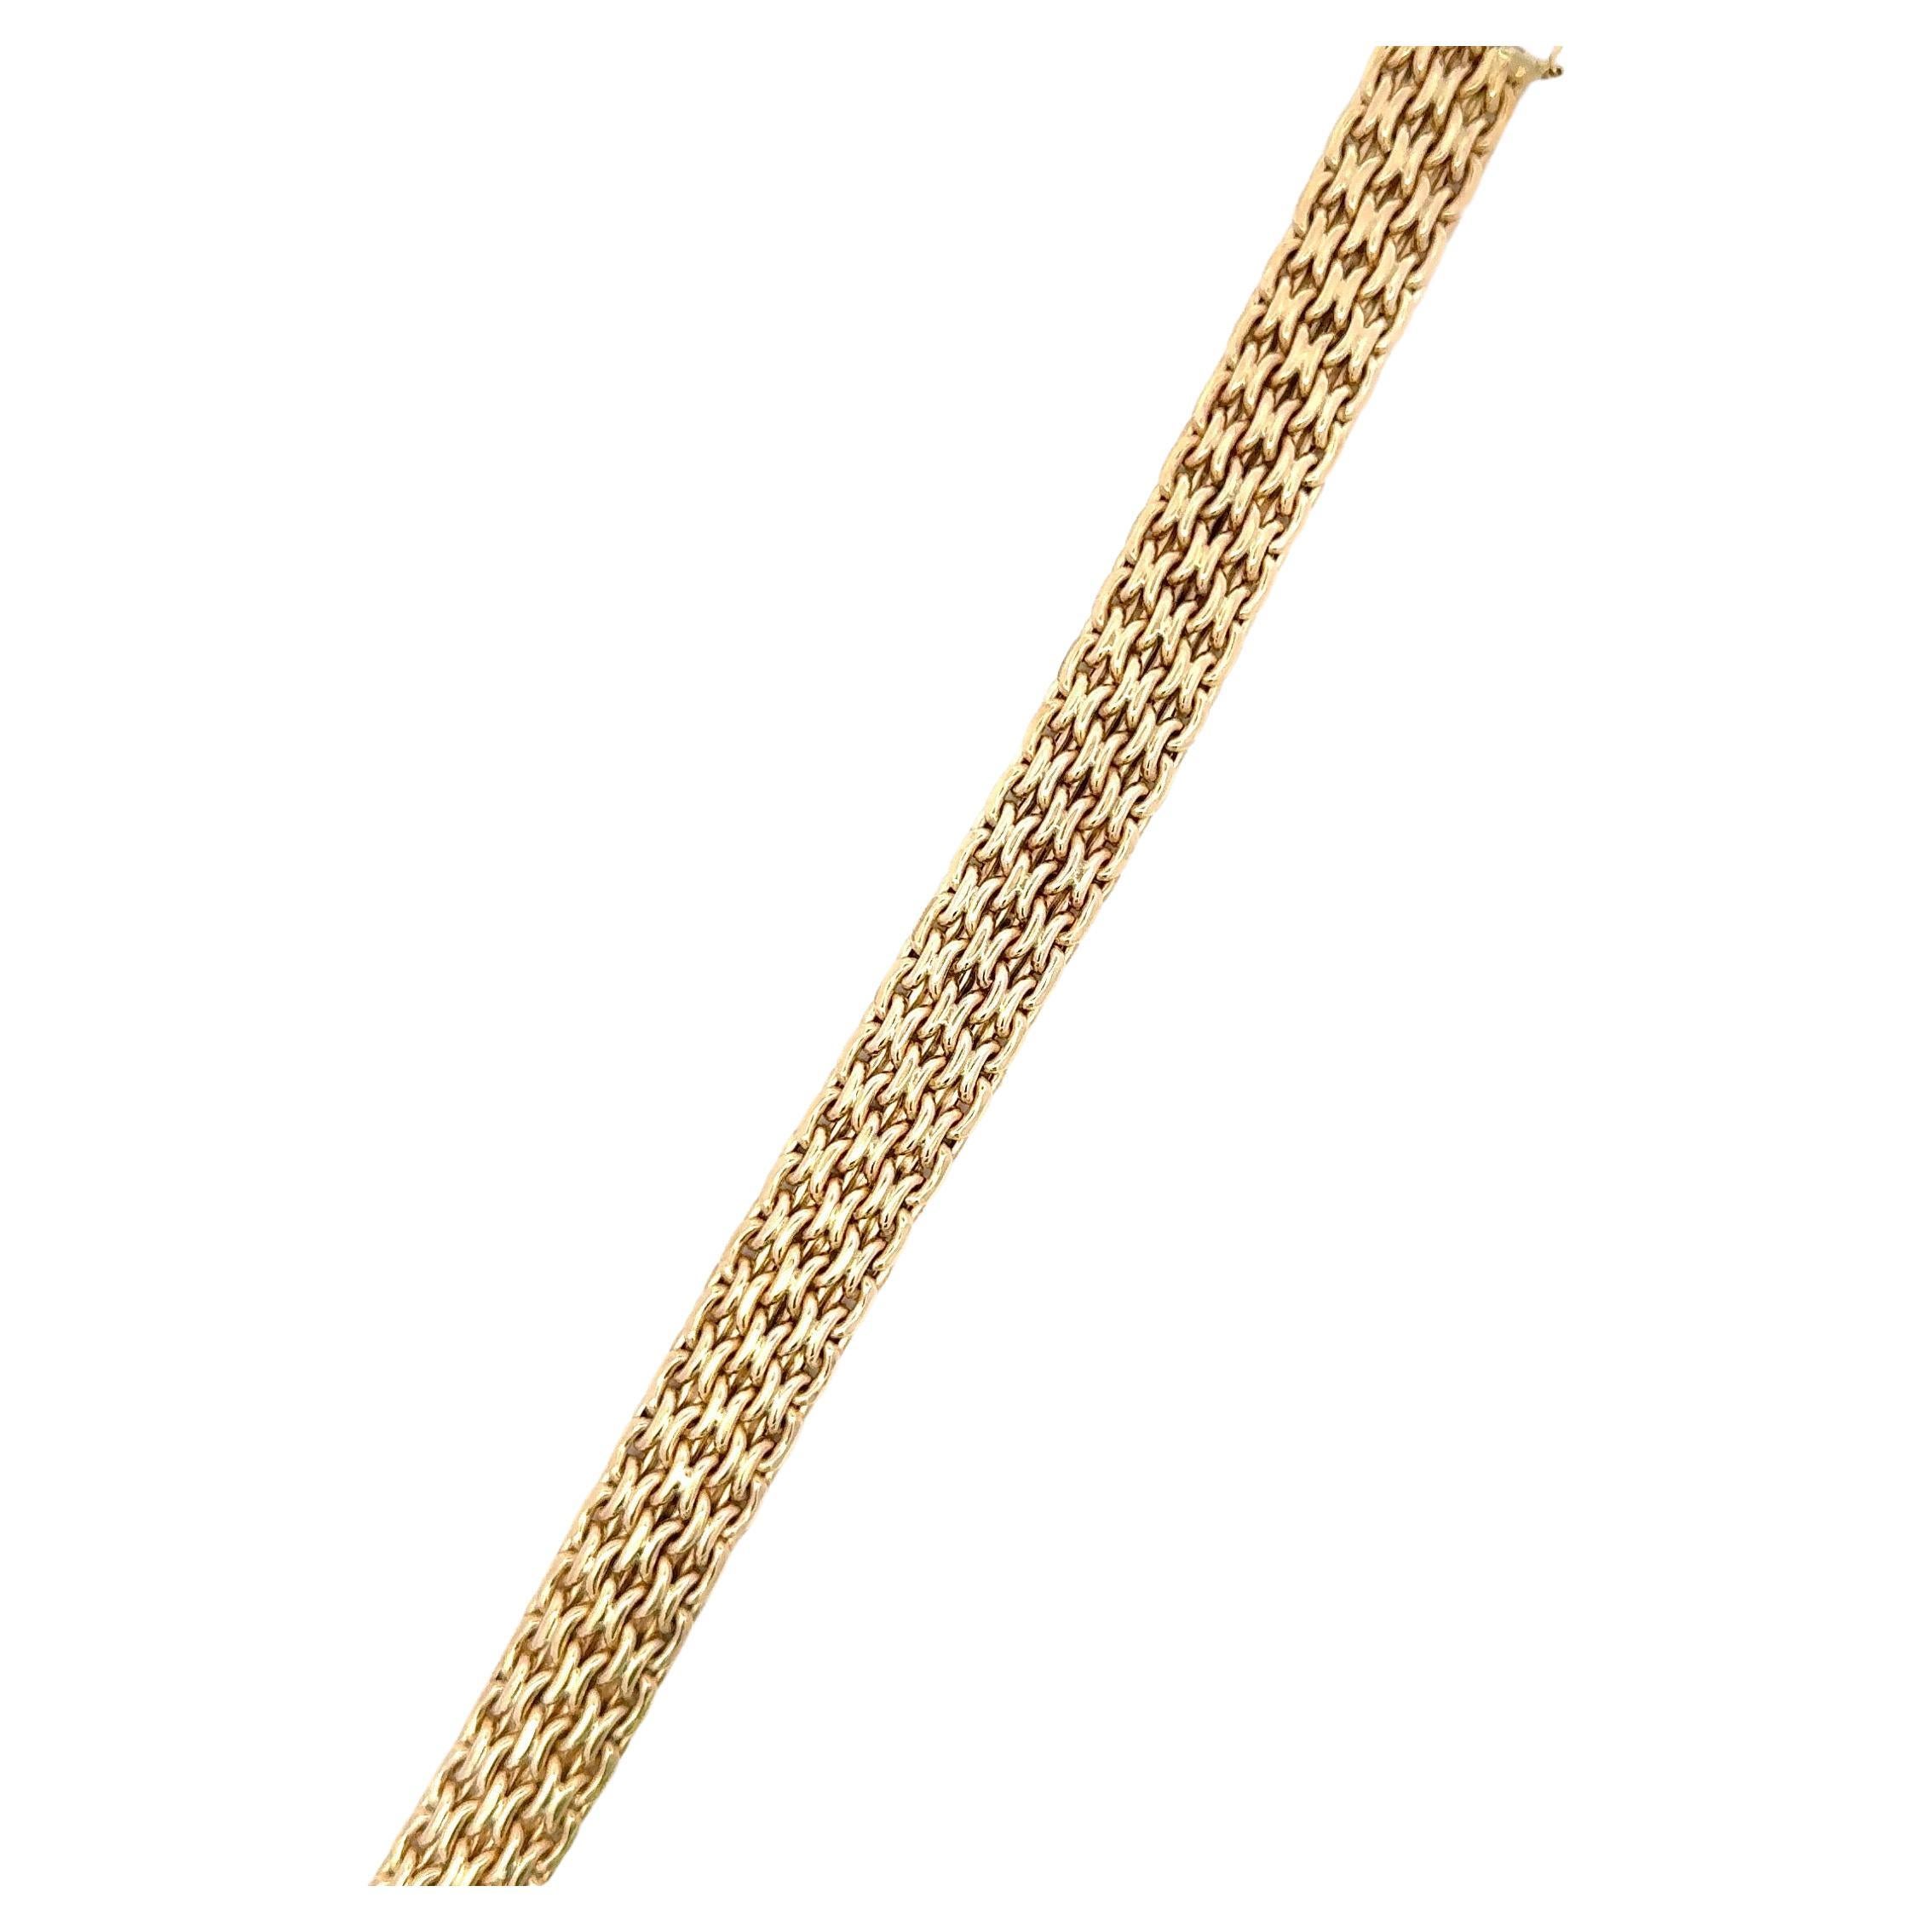 Italian, 14 karat yellow gold woven link bracelet weighing 15.9 grams. 
More link bracelets available
Search Harbor Diamonds